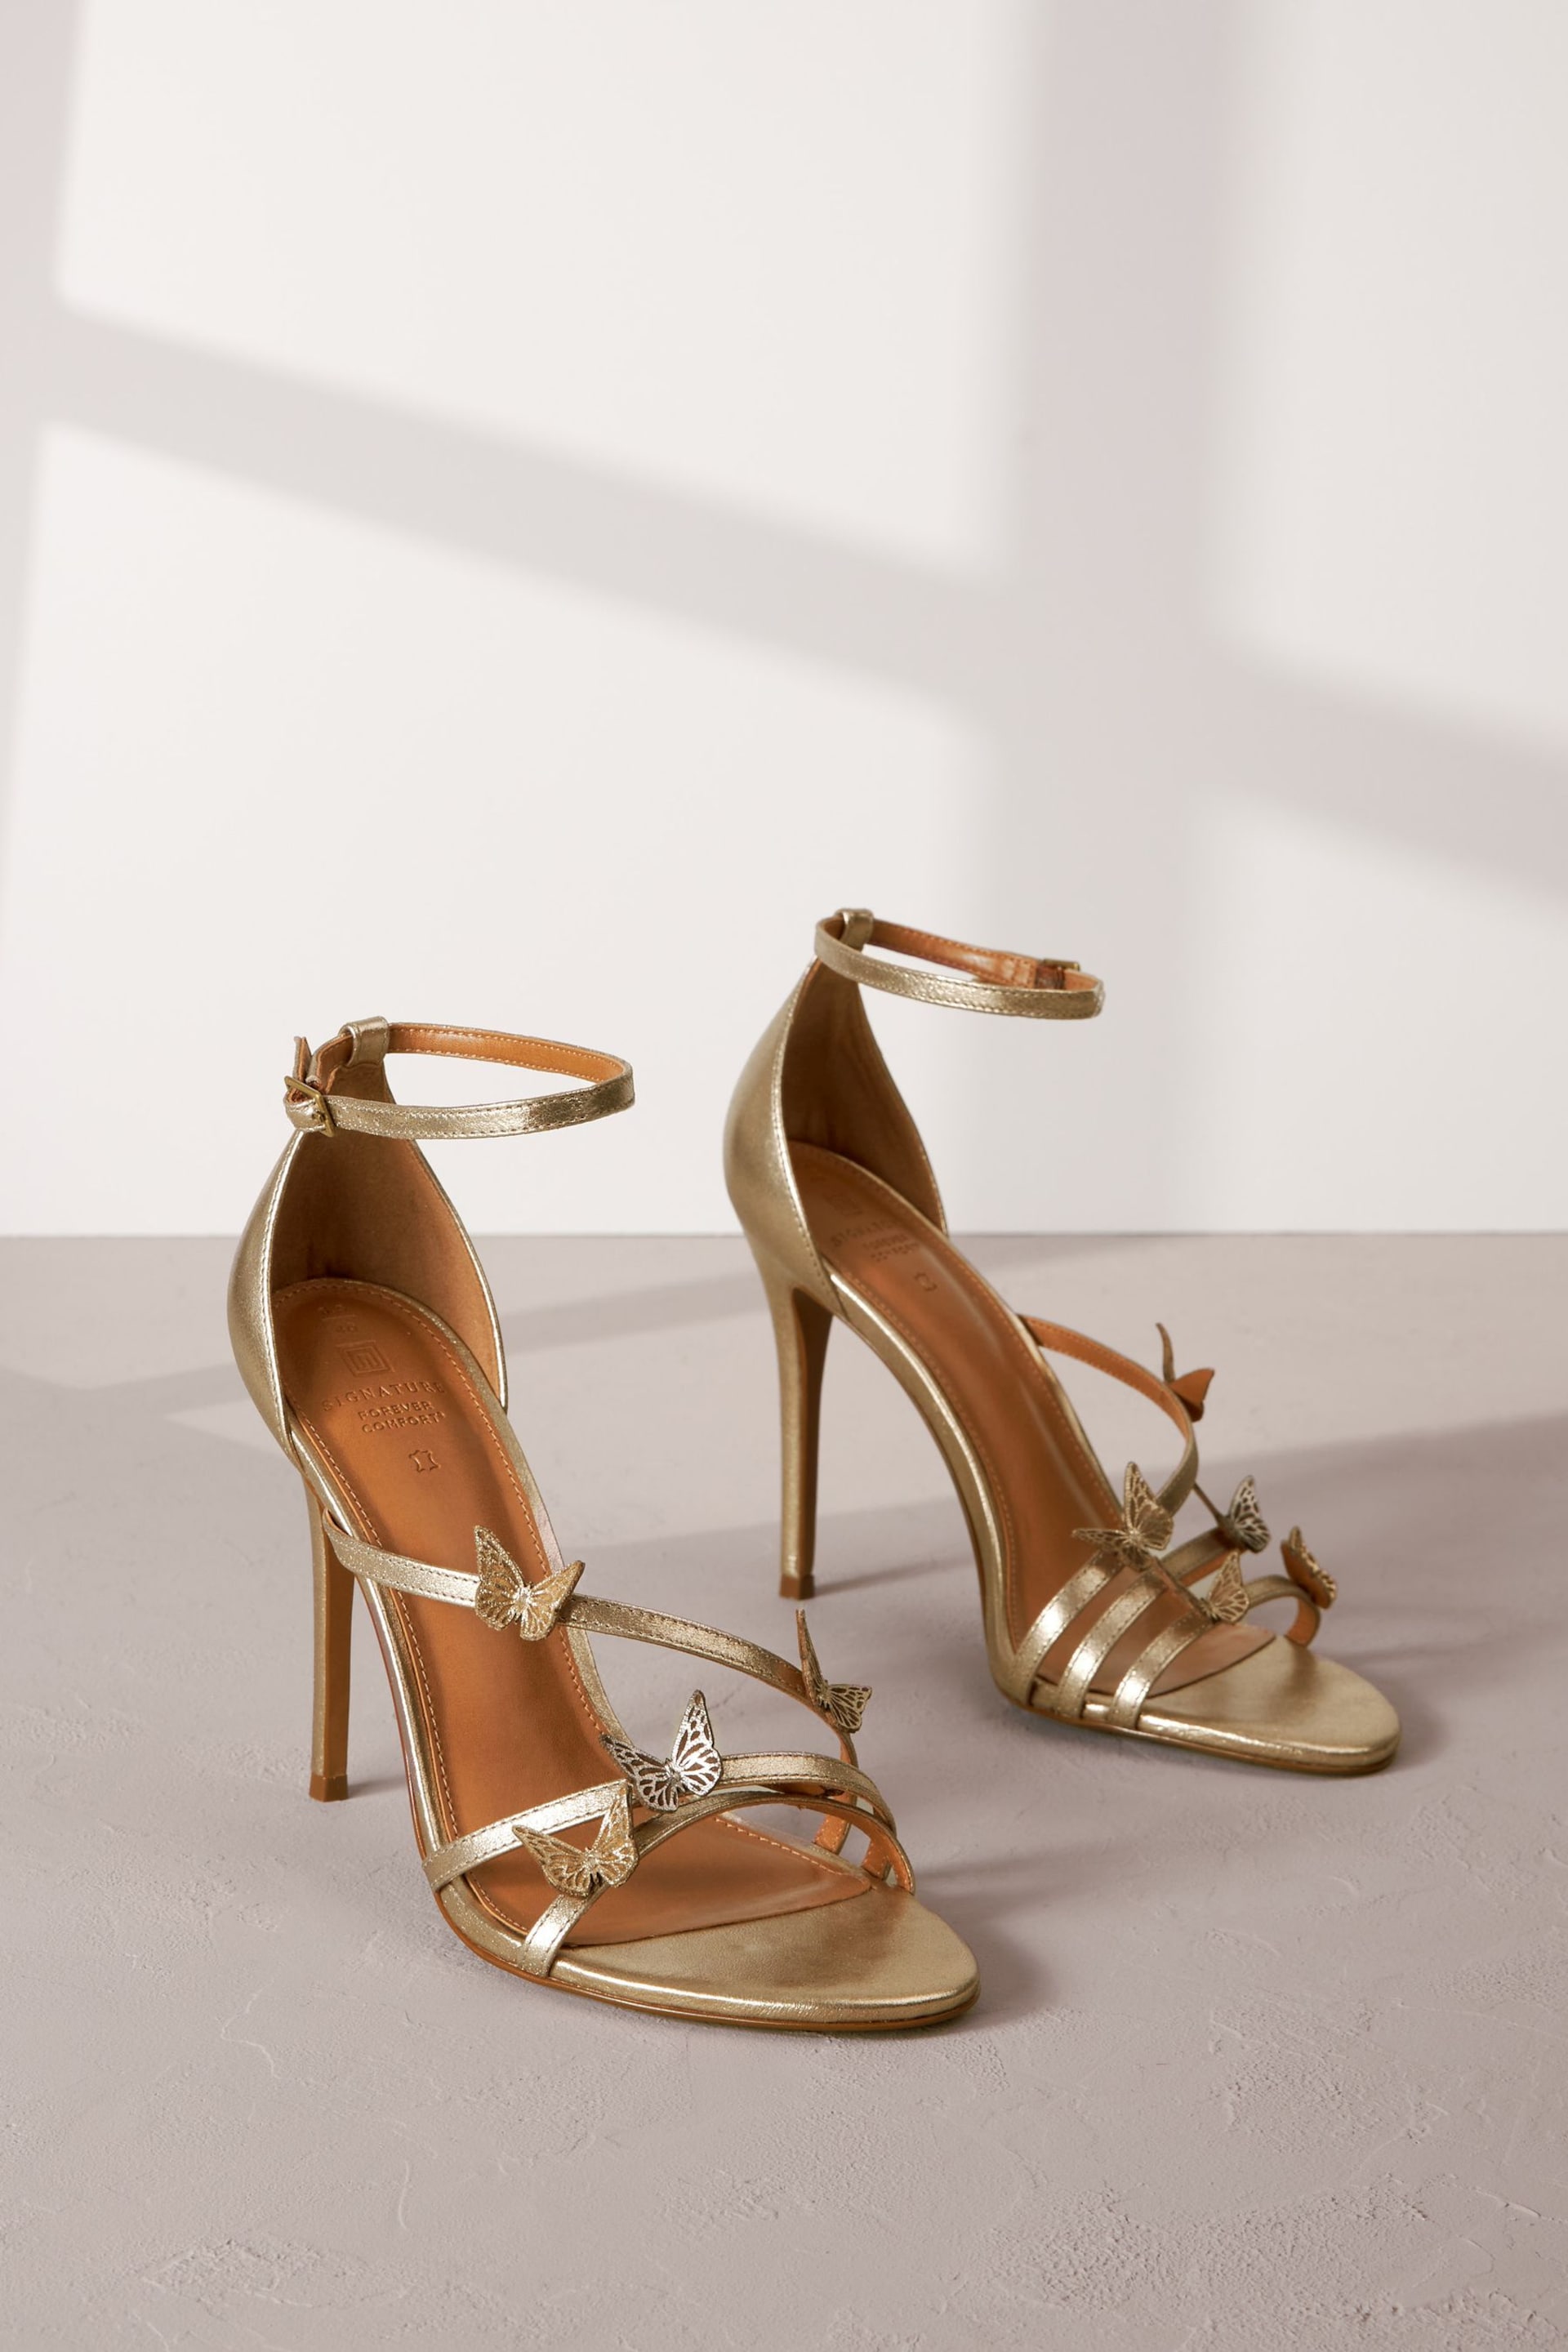 Gold Signature Leather Butterfly High Heel Sandals - Image 1 of 6